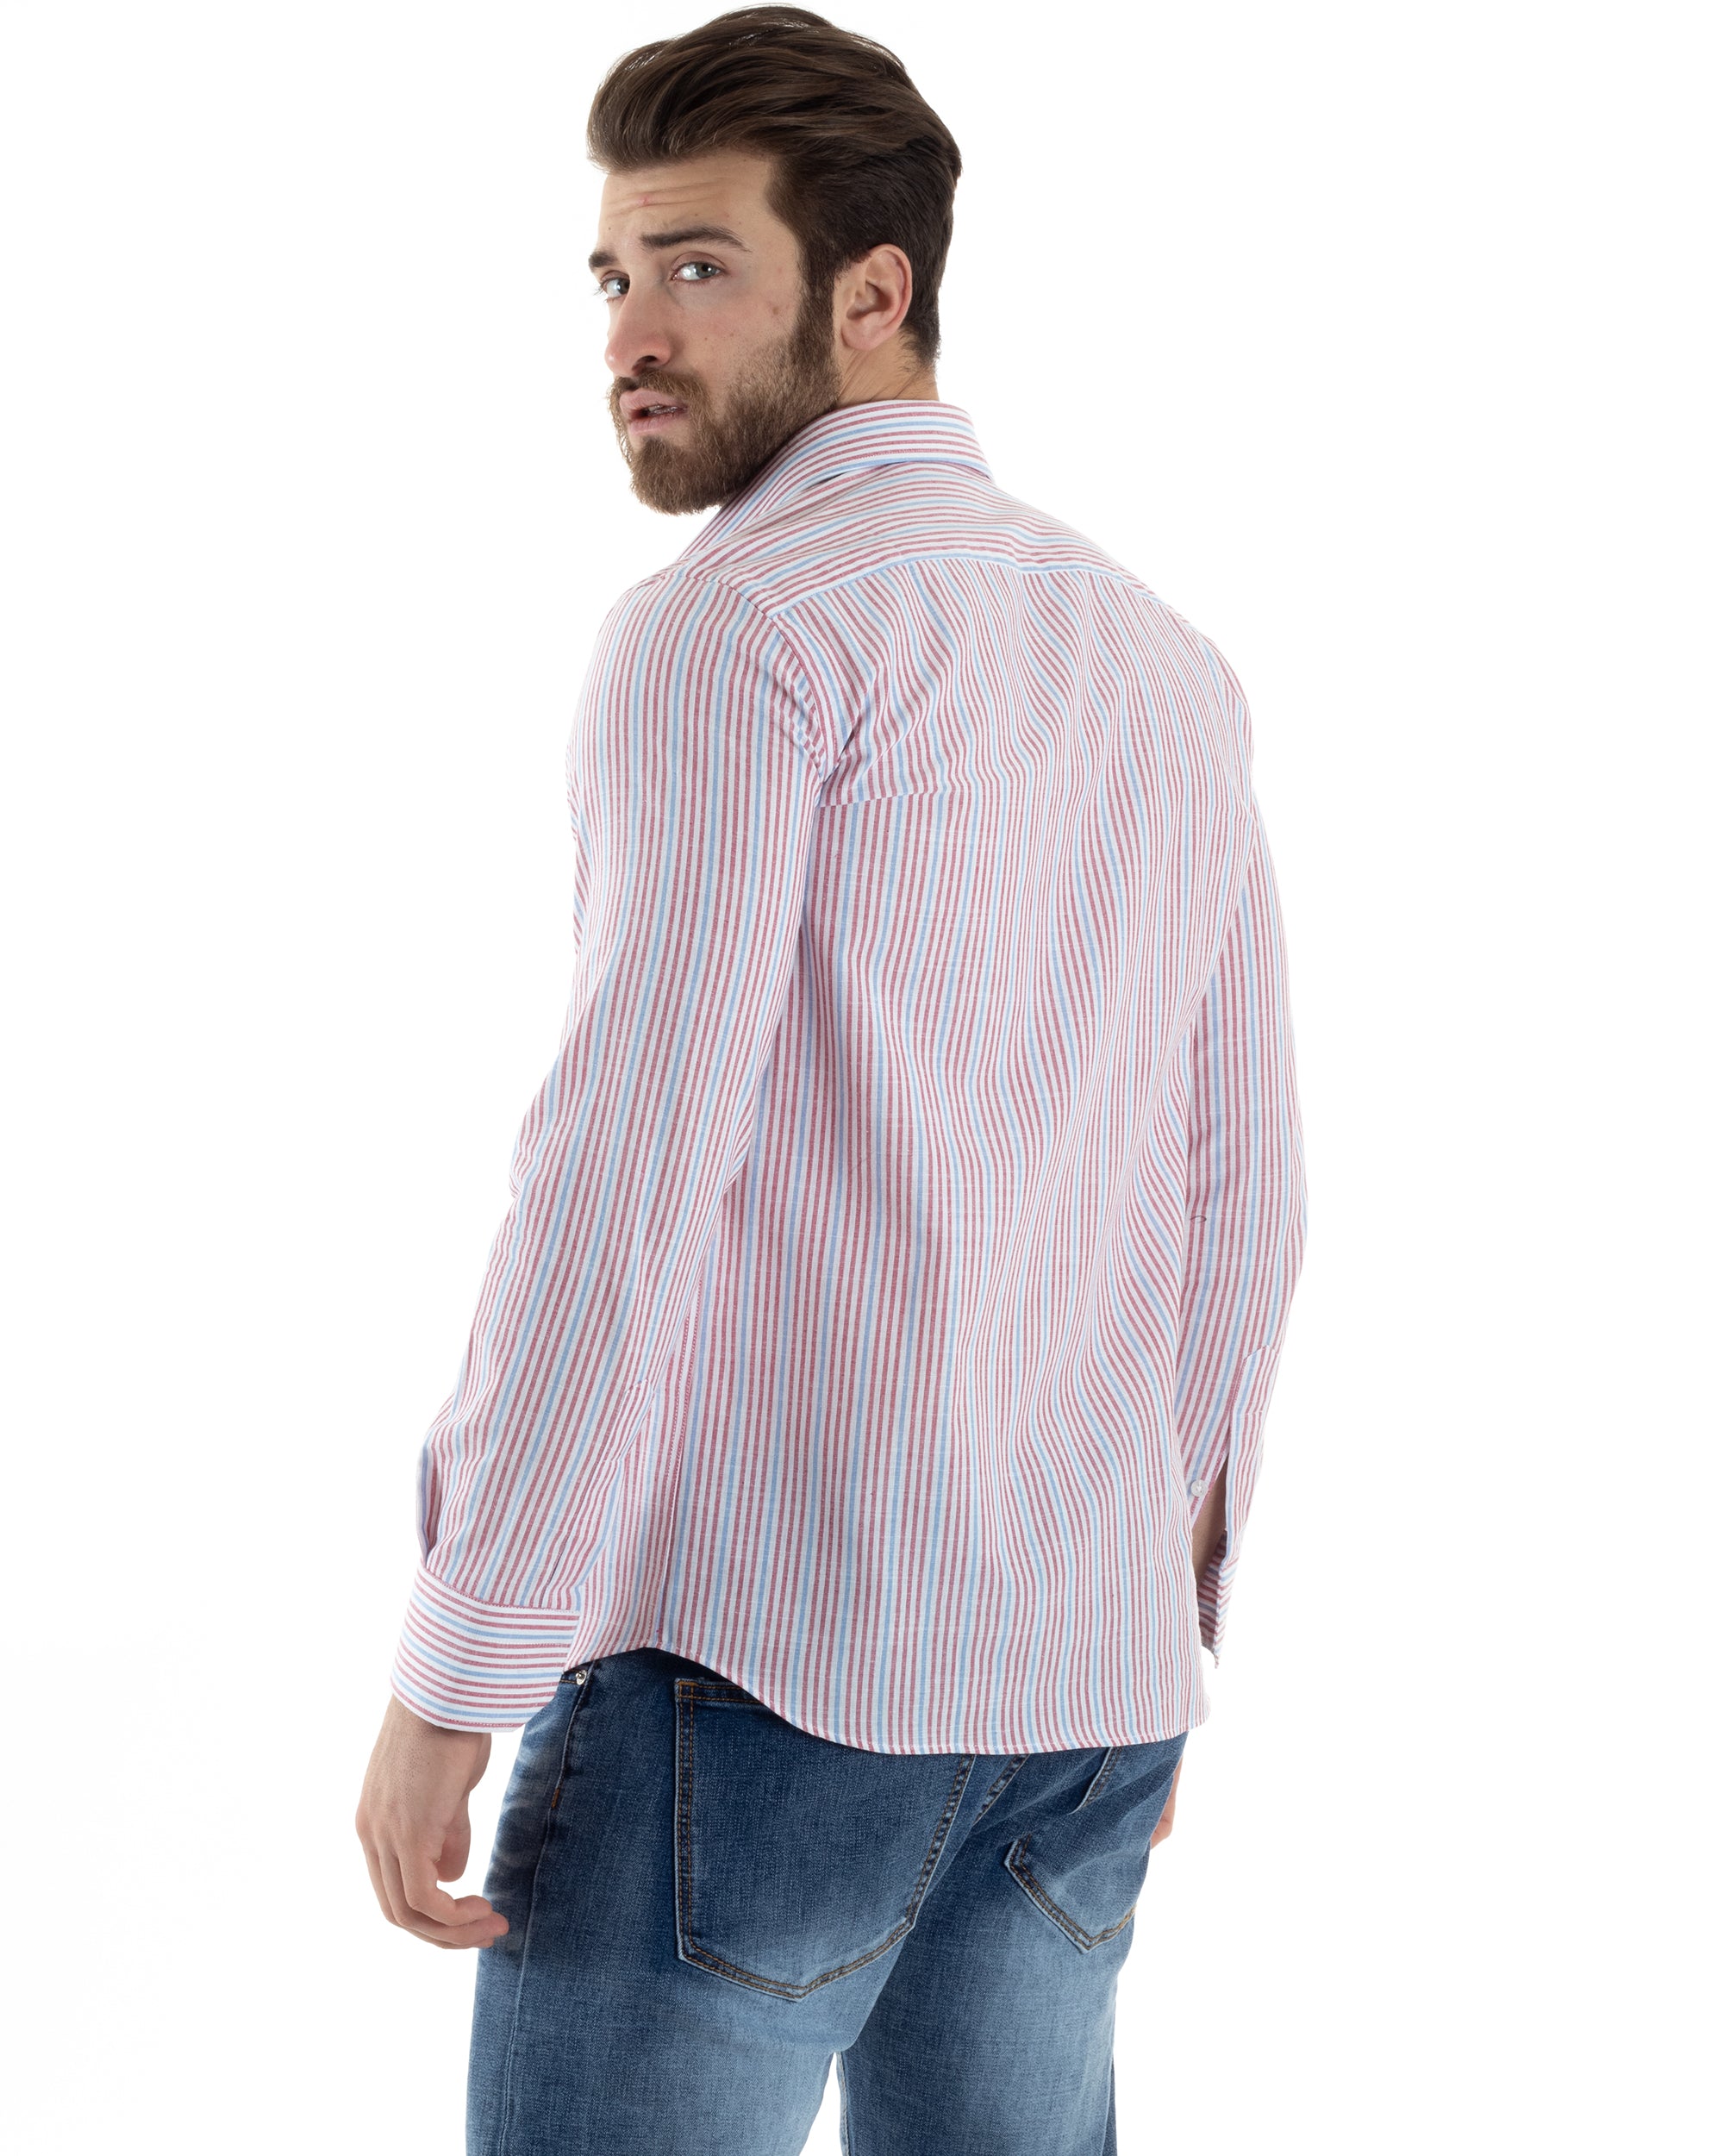 Men's Shirt With French Collar Long Sleeve Linen Narrow Stripe Casual Blue GIOSAL-C2748A